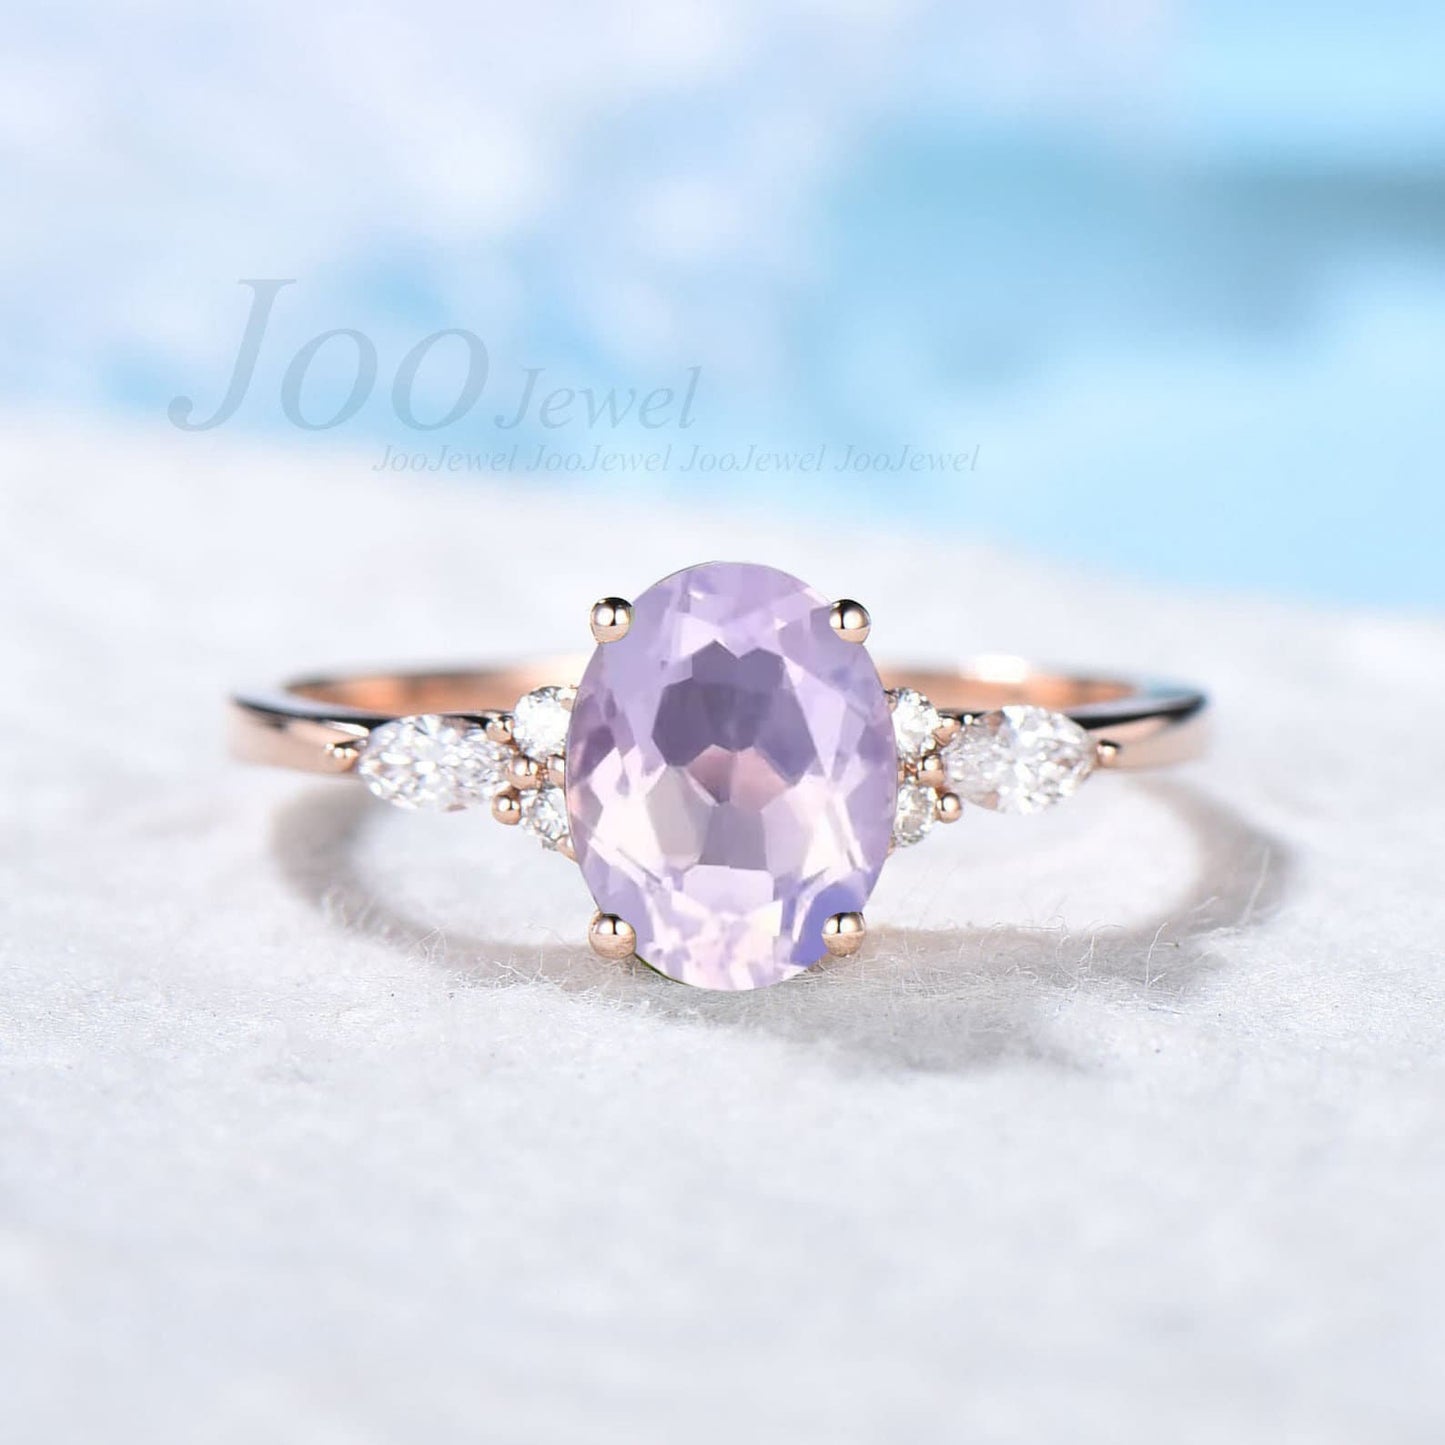 Vintage 1.5ct Natural Oval Lavender Amethyst Wedding Ring Rose Gold Promise Ring Alternative Engagement Ring for Women Purple Gemstone Gifts